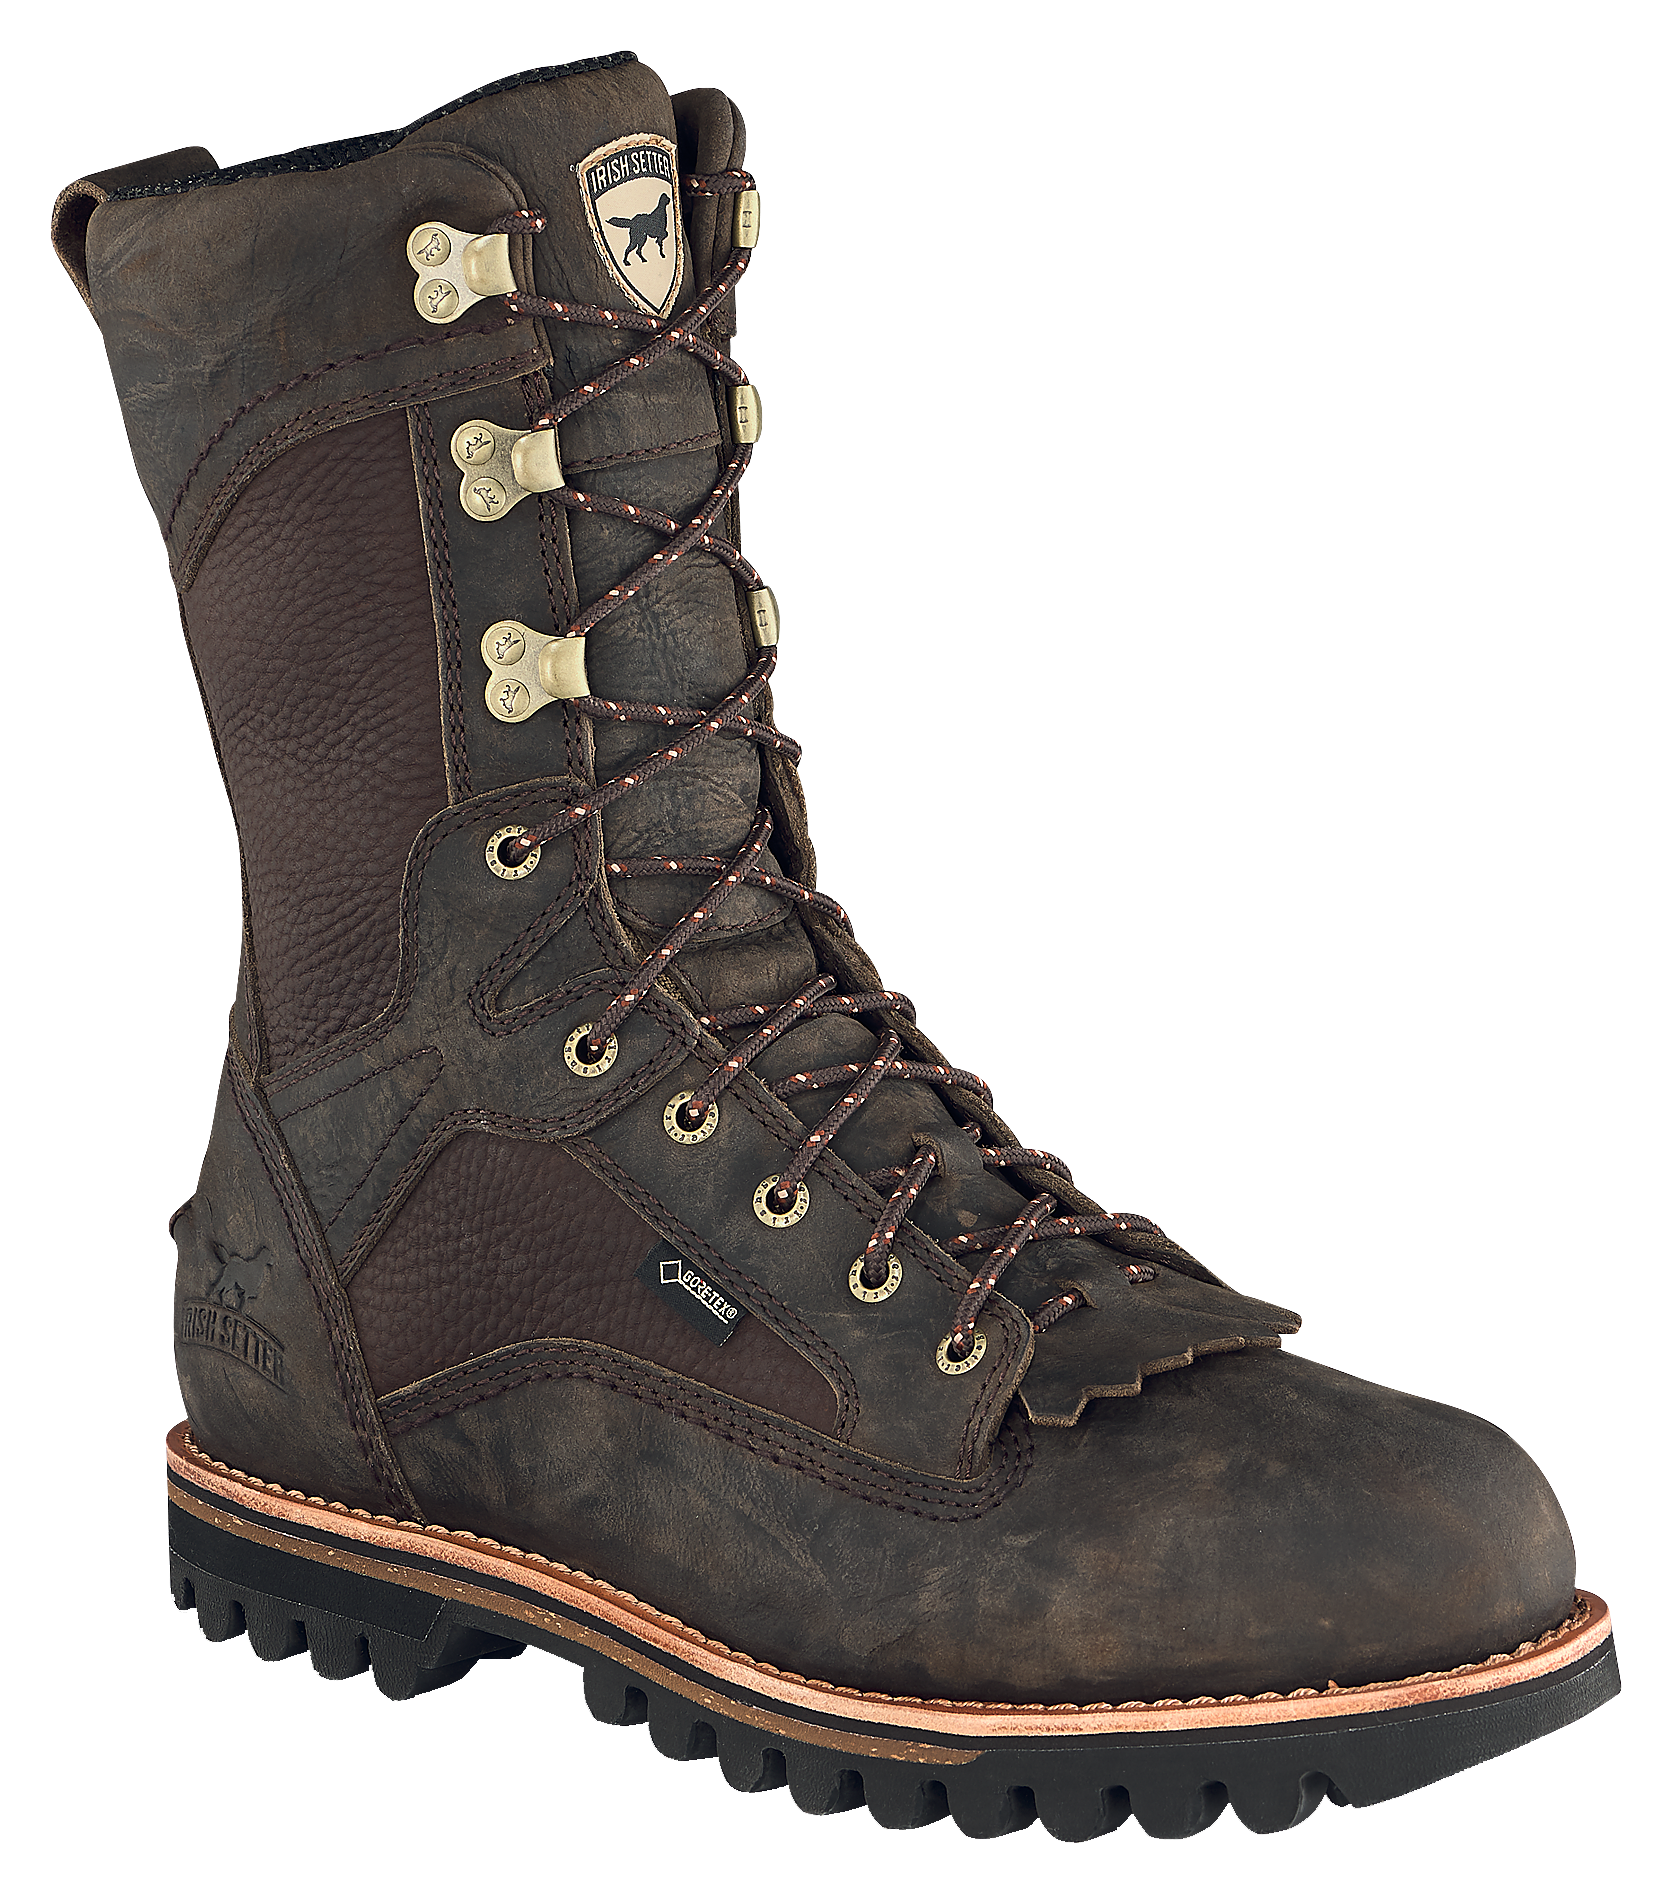 Irish Setter Elk Tracker GORE-TEX Insulated Hunting Boots for Men - Brown - 12M